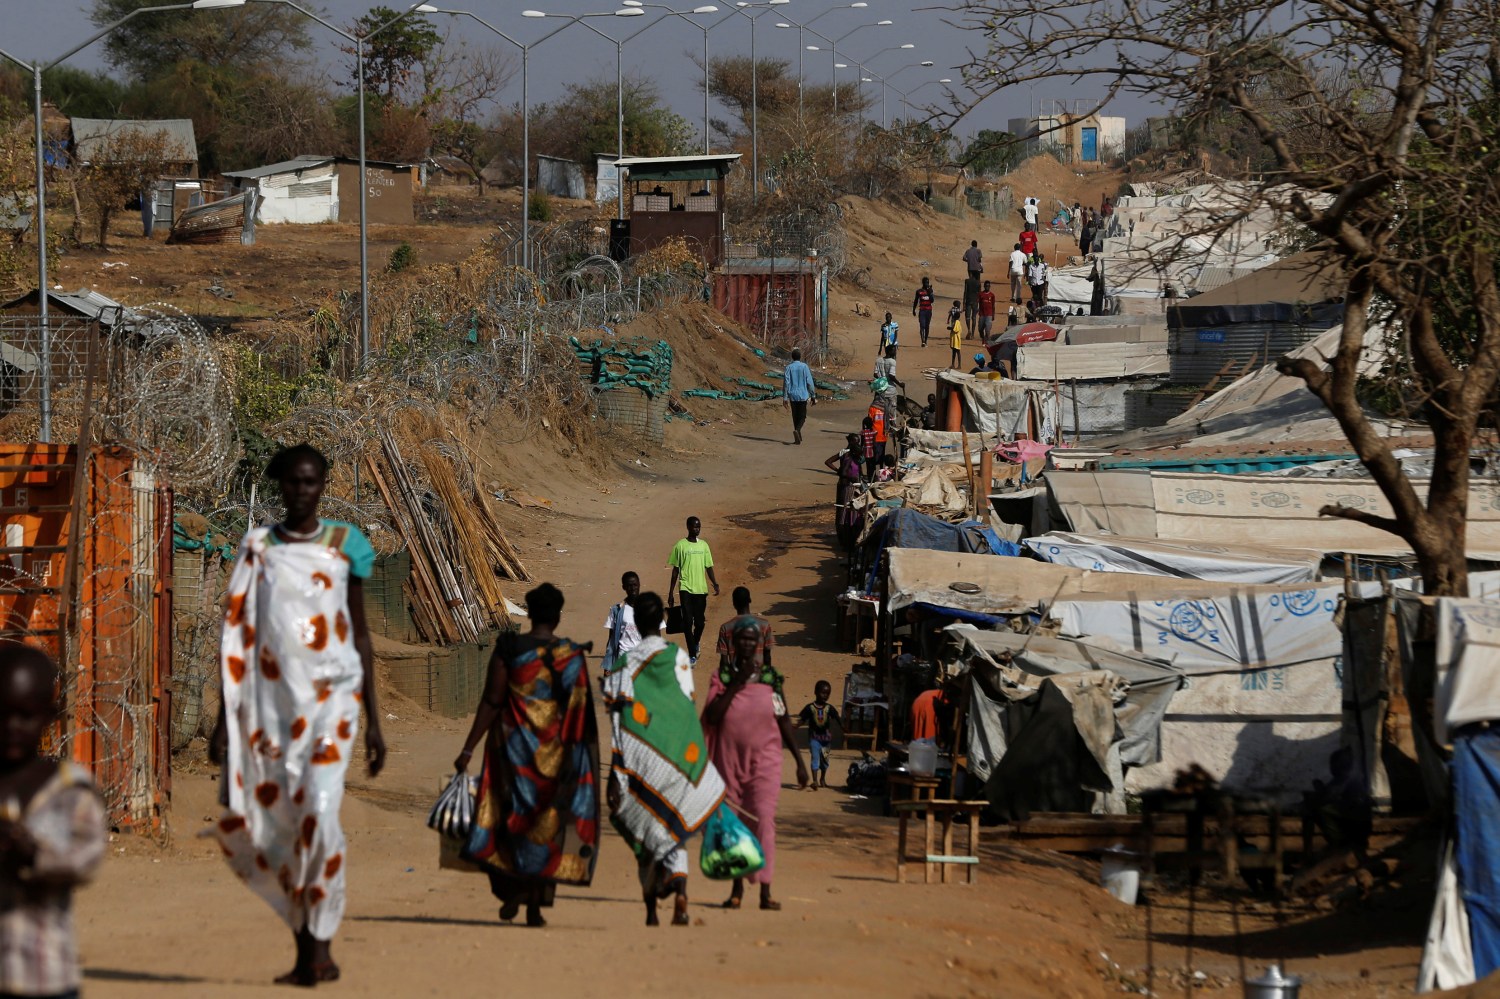 Internally displaced people walk on a road close to the outer perimeter of a United Nations Mission in South Sudan (UNMISS) Protection of Civilian site (CoP), outside the capital Juba, South Sudan, January 25, 2017. REUTERS/Siegfried Modola SEARCH "FAMILY MODOLA" FOR THIS STORY. SEARCH "WIDER IMAGE" FOR ALL STORIES. - RC1819596370